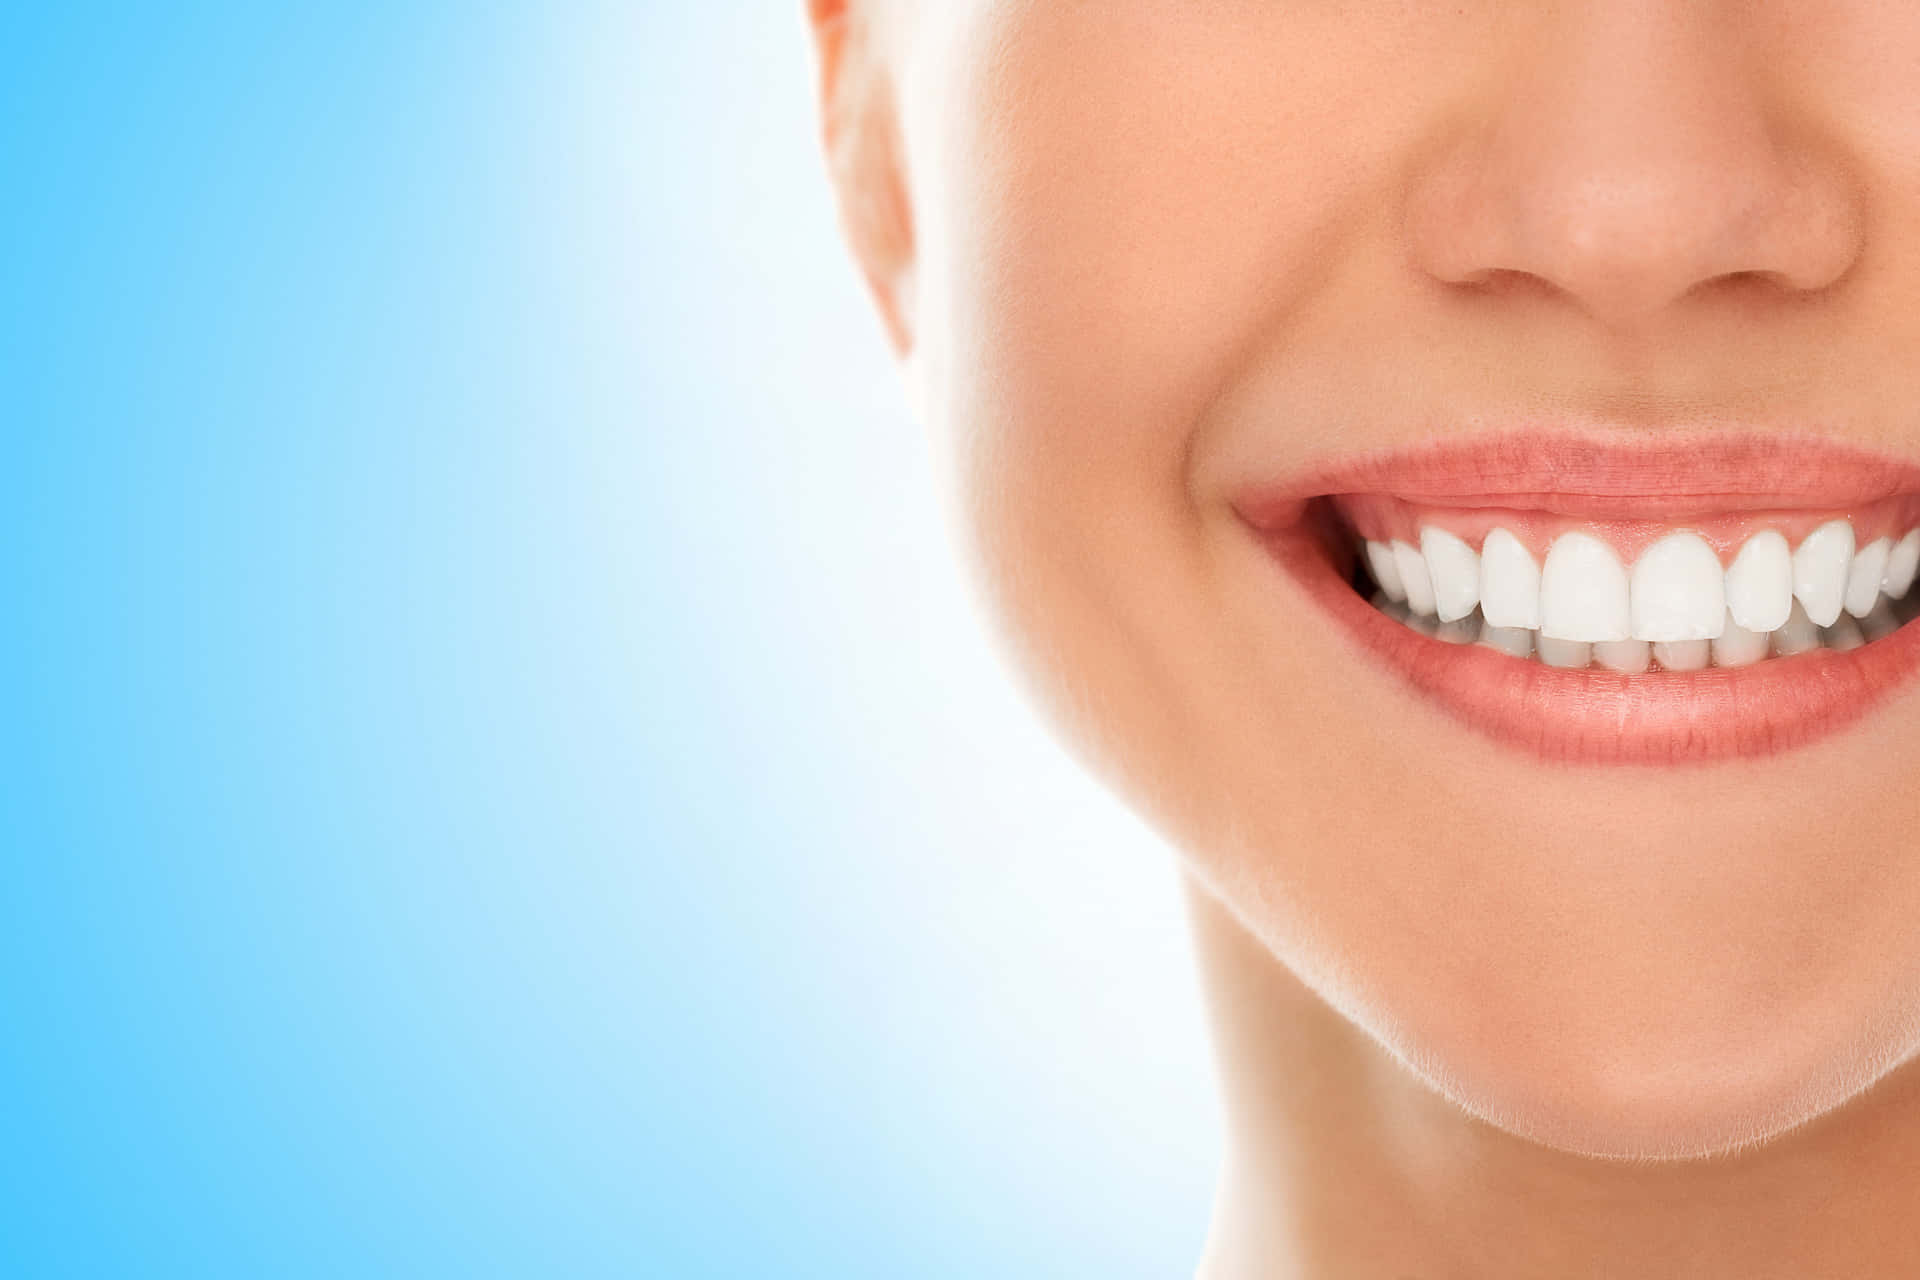 Caption: Stunning Smile with Healthy Permanent Teeth Wallpaper